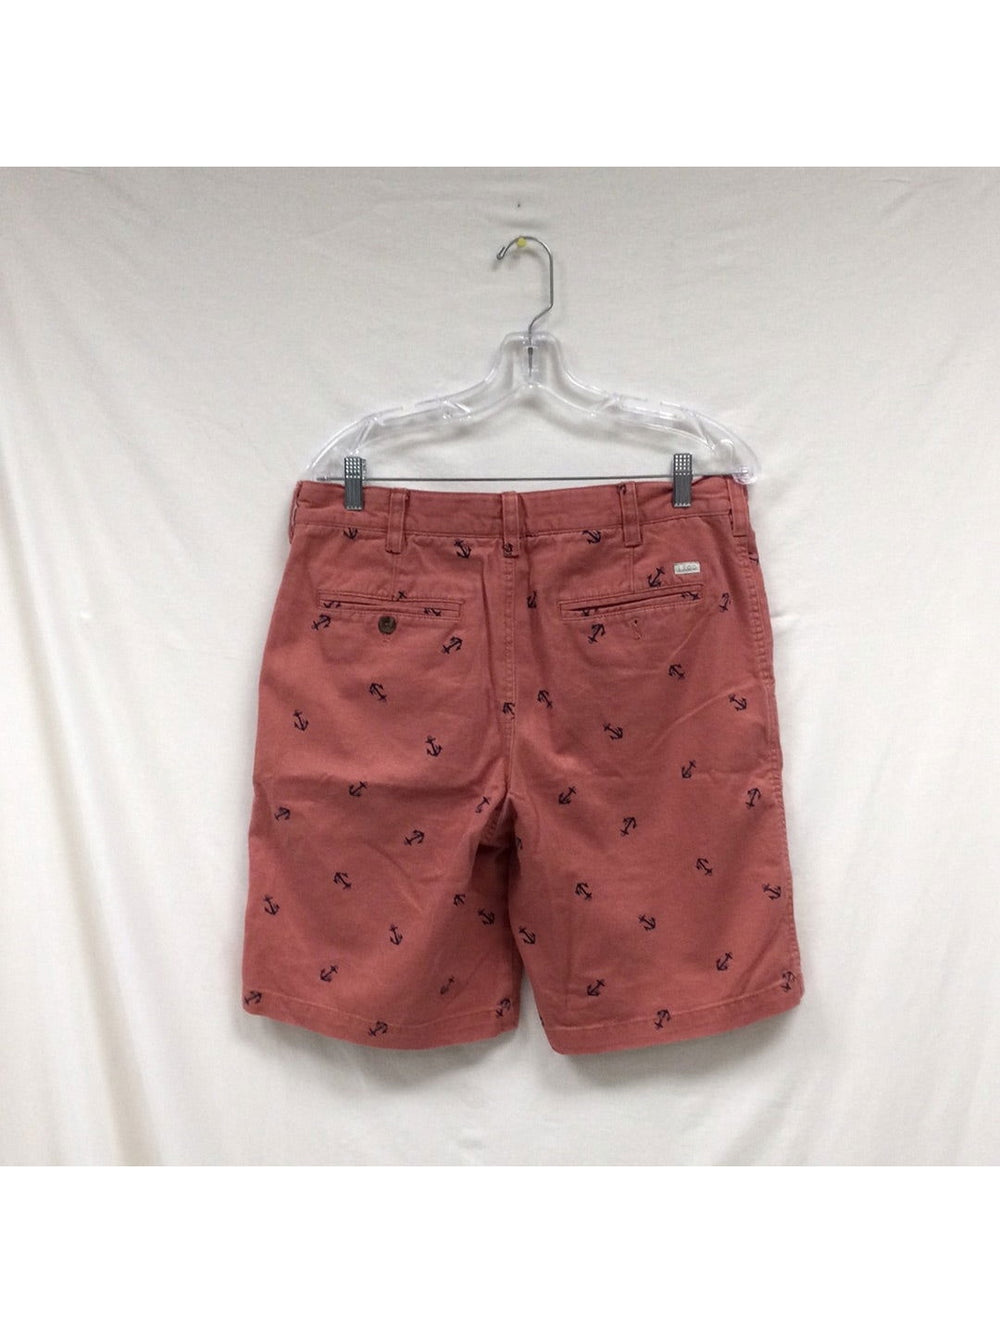 IZOD Men Salmon Pink Shorts With Anchors Size 33 - The Kennedy Collective Thrift - 